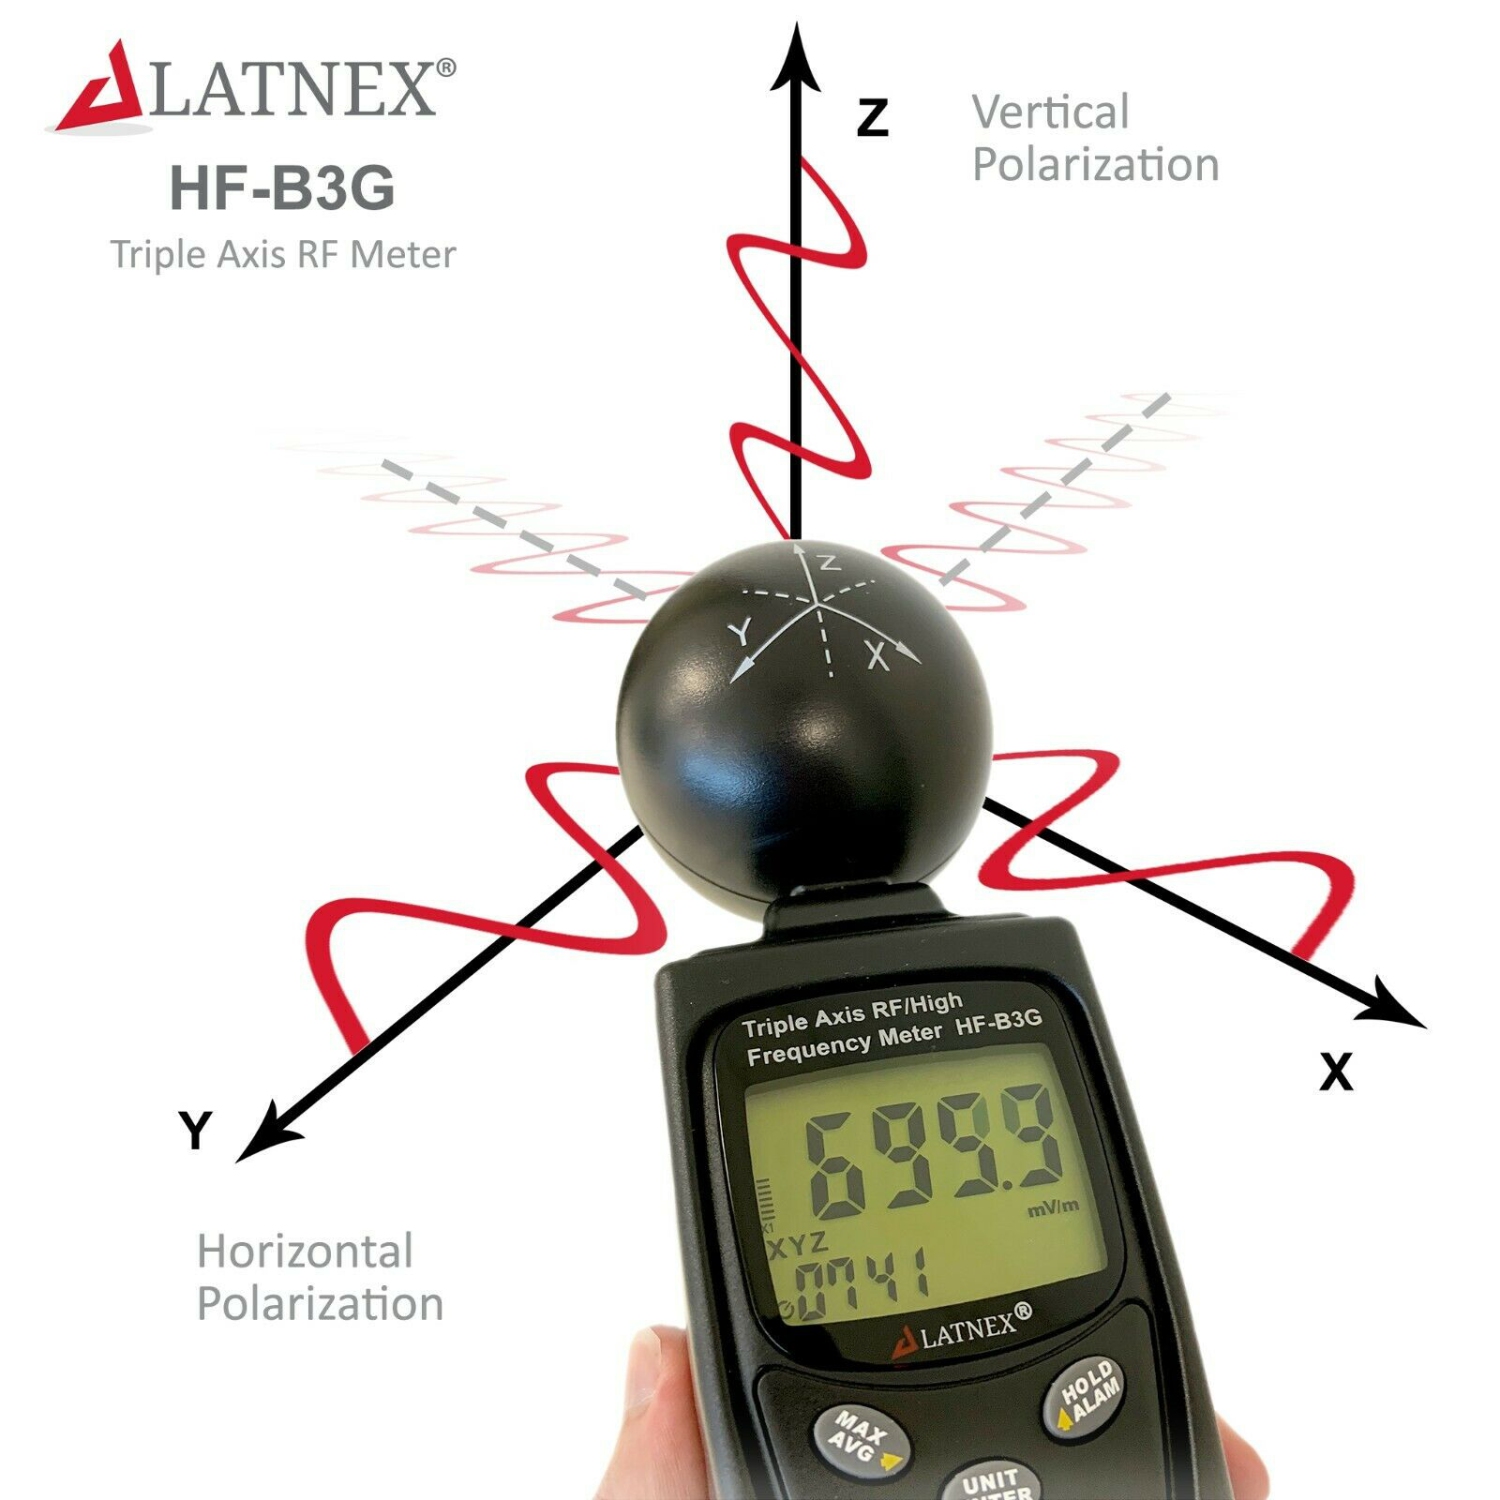 LATNEX® HF-B3G: Triple Axis RF/High Frequency Power Meter Analyzer   Detector Measures EMF Radiation-Cell Phones-Smart Meters-Cell Towers-WiFi- Bluetooth-Calibrated-Used for EMF Home Inspections Best Buy Canada